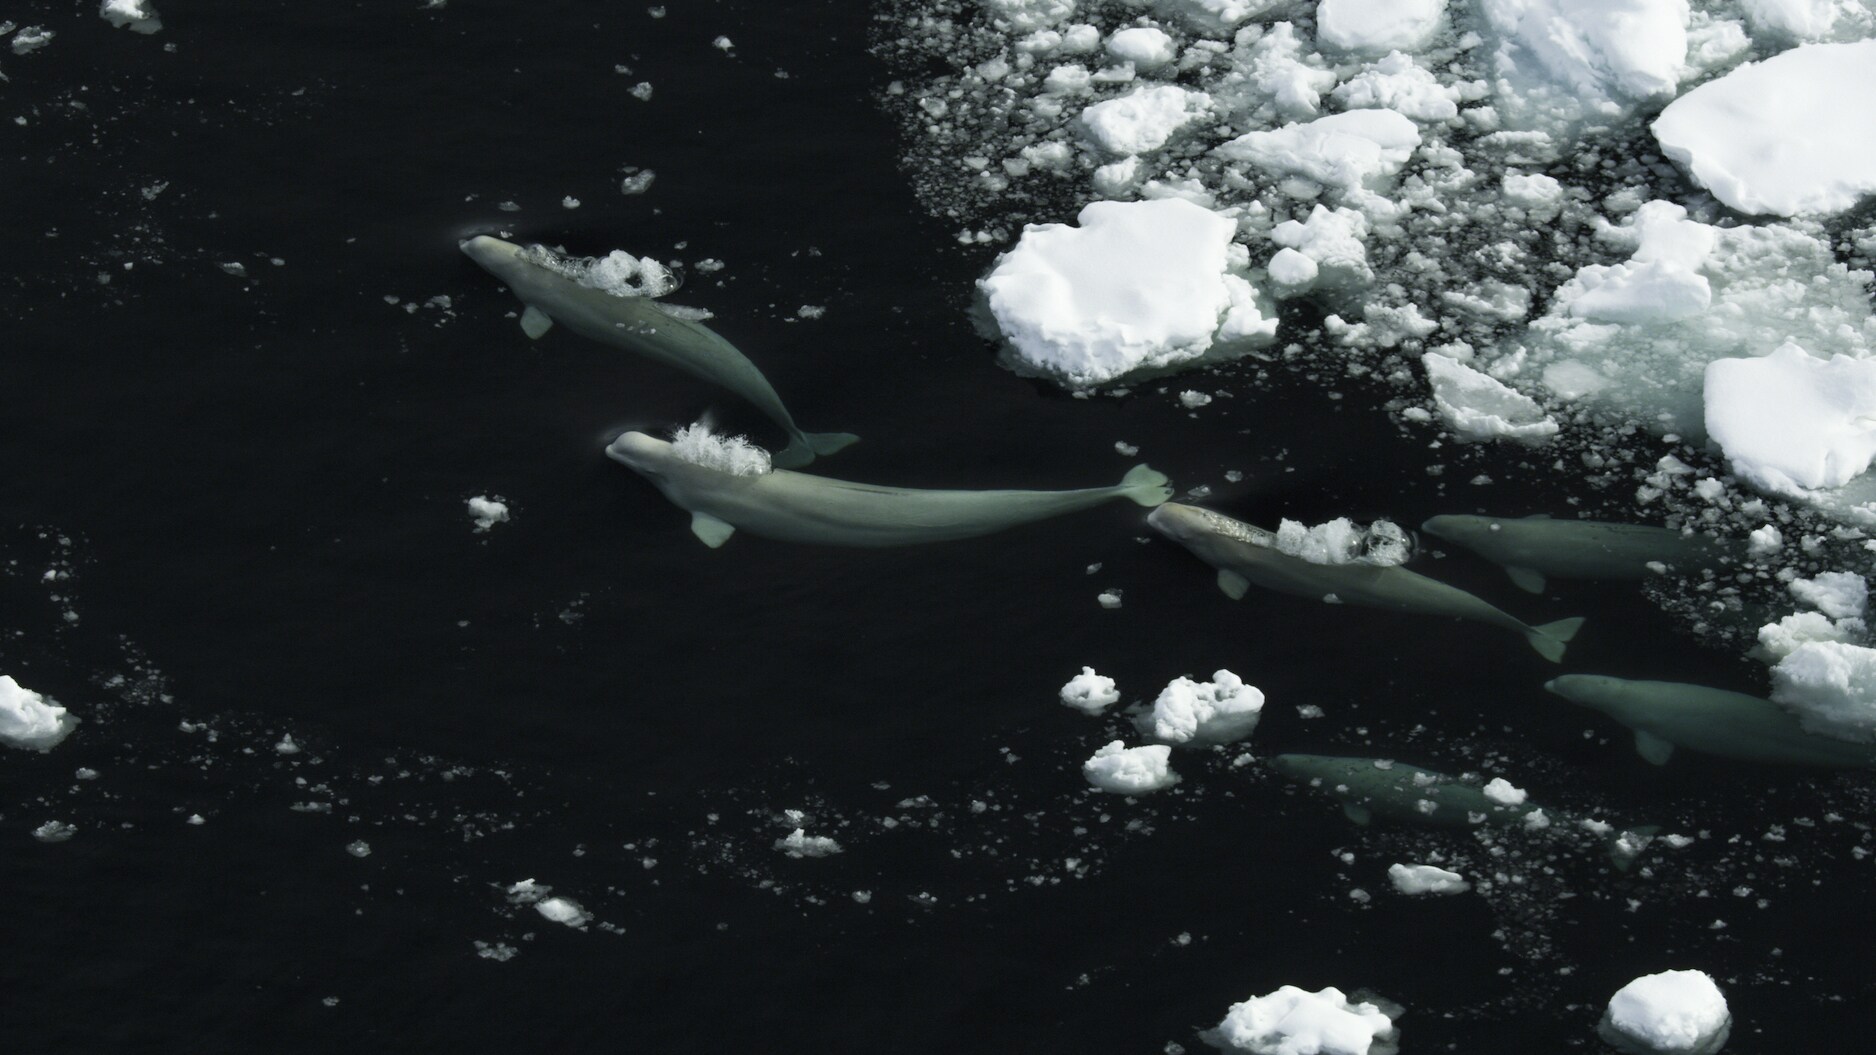 Belugas are made for the Arctic: they lack dorsal fins, which allows them to swim under sea ice. This serves as a form of protection from predators with massive dorsals, like killer whales. (National Geographic for Disney+/Thomas Miller)